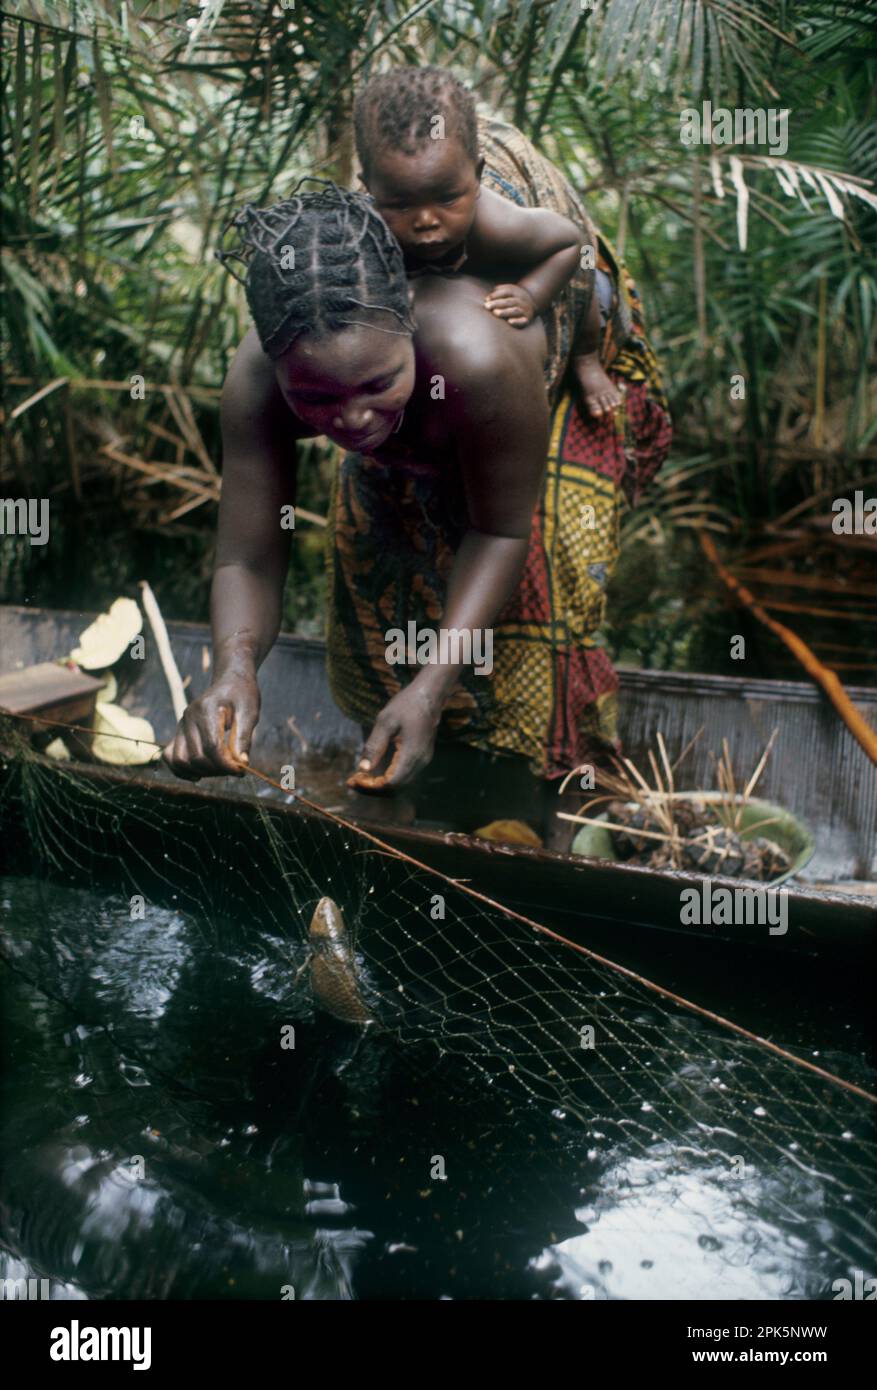 Africa, Democratic Republic of the Congo, Équateur province, Ngiri area. Woman or Libinza ethnic group carrying baby in canoe while removing fish caught in net in swamp forest. Stock Photo